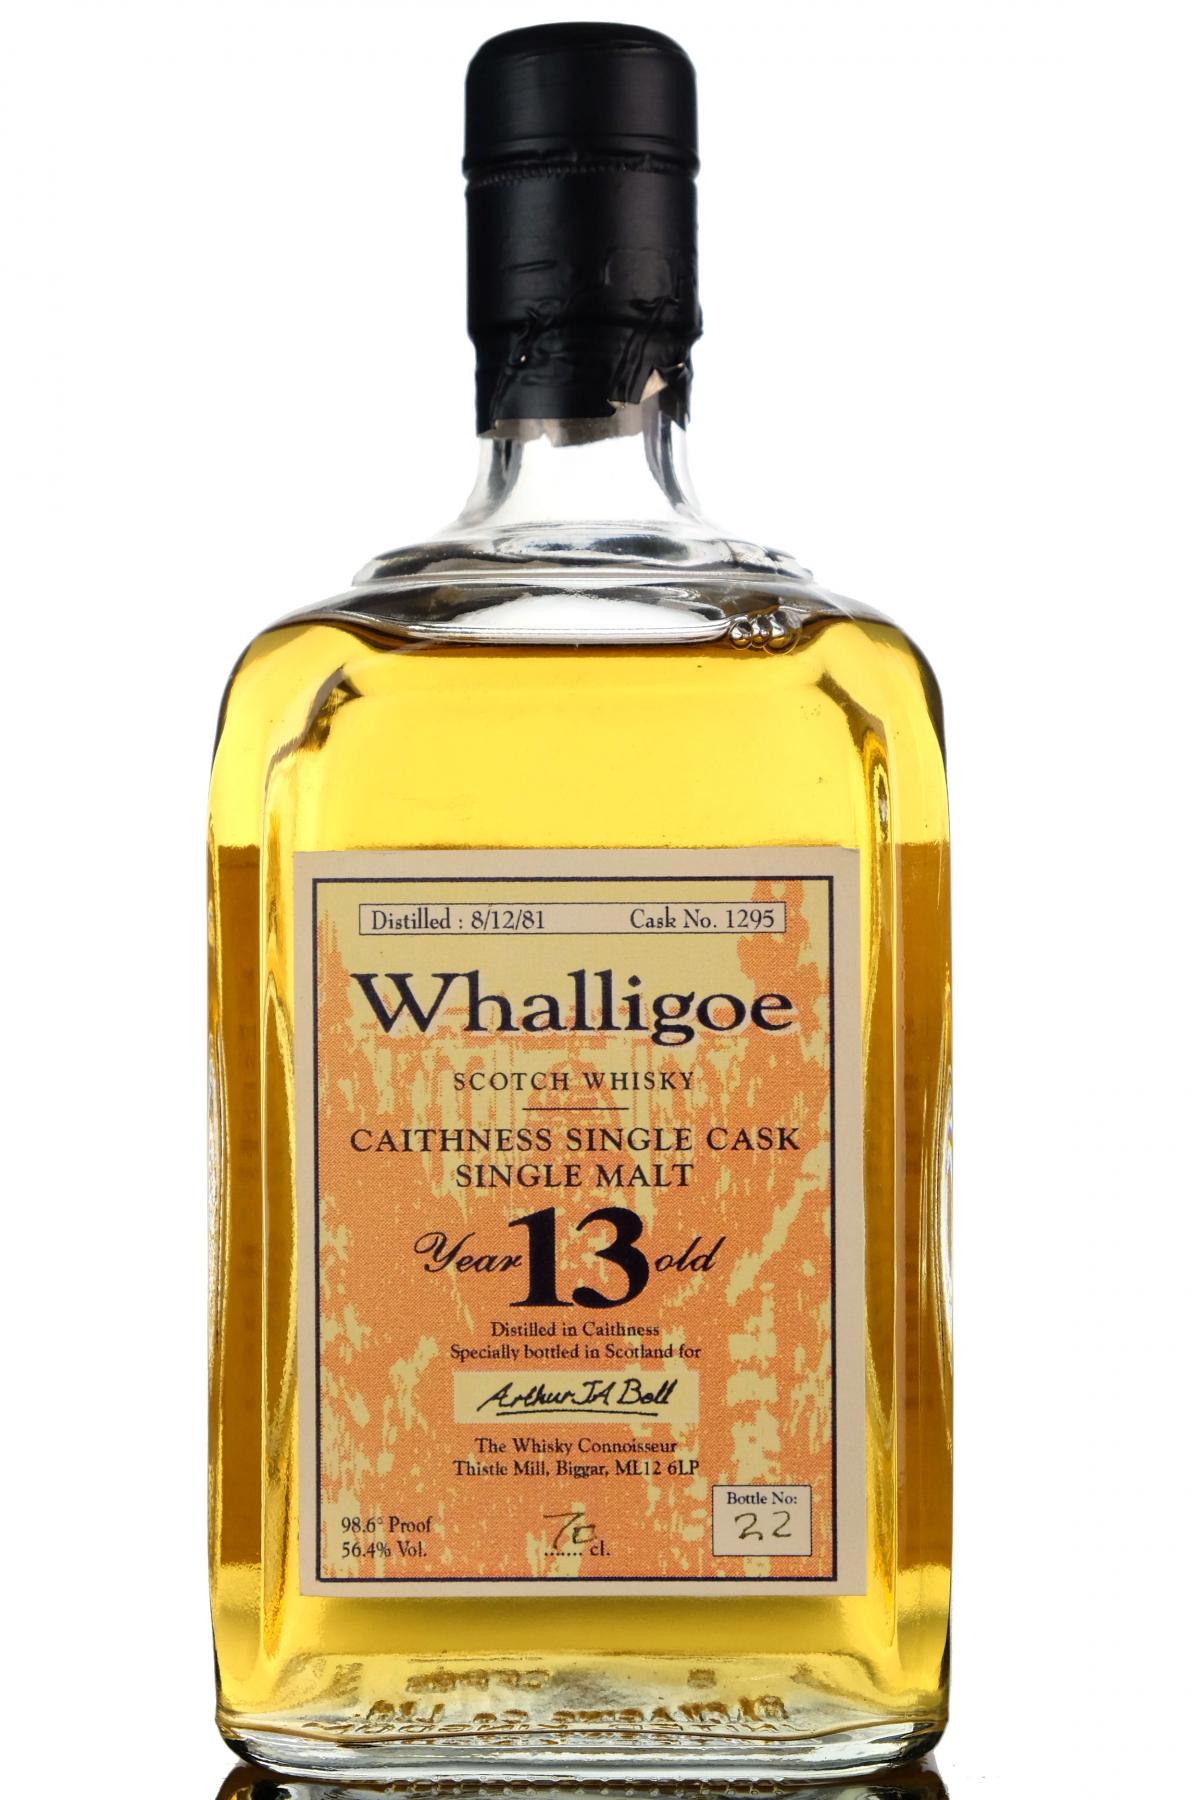 Whalligoe Old Pulteney 1981 - 13 Year Old - The Whisky Connoisseur